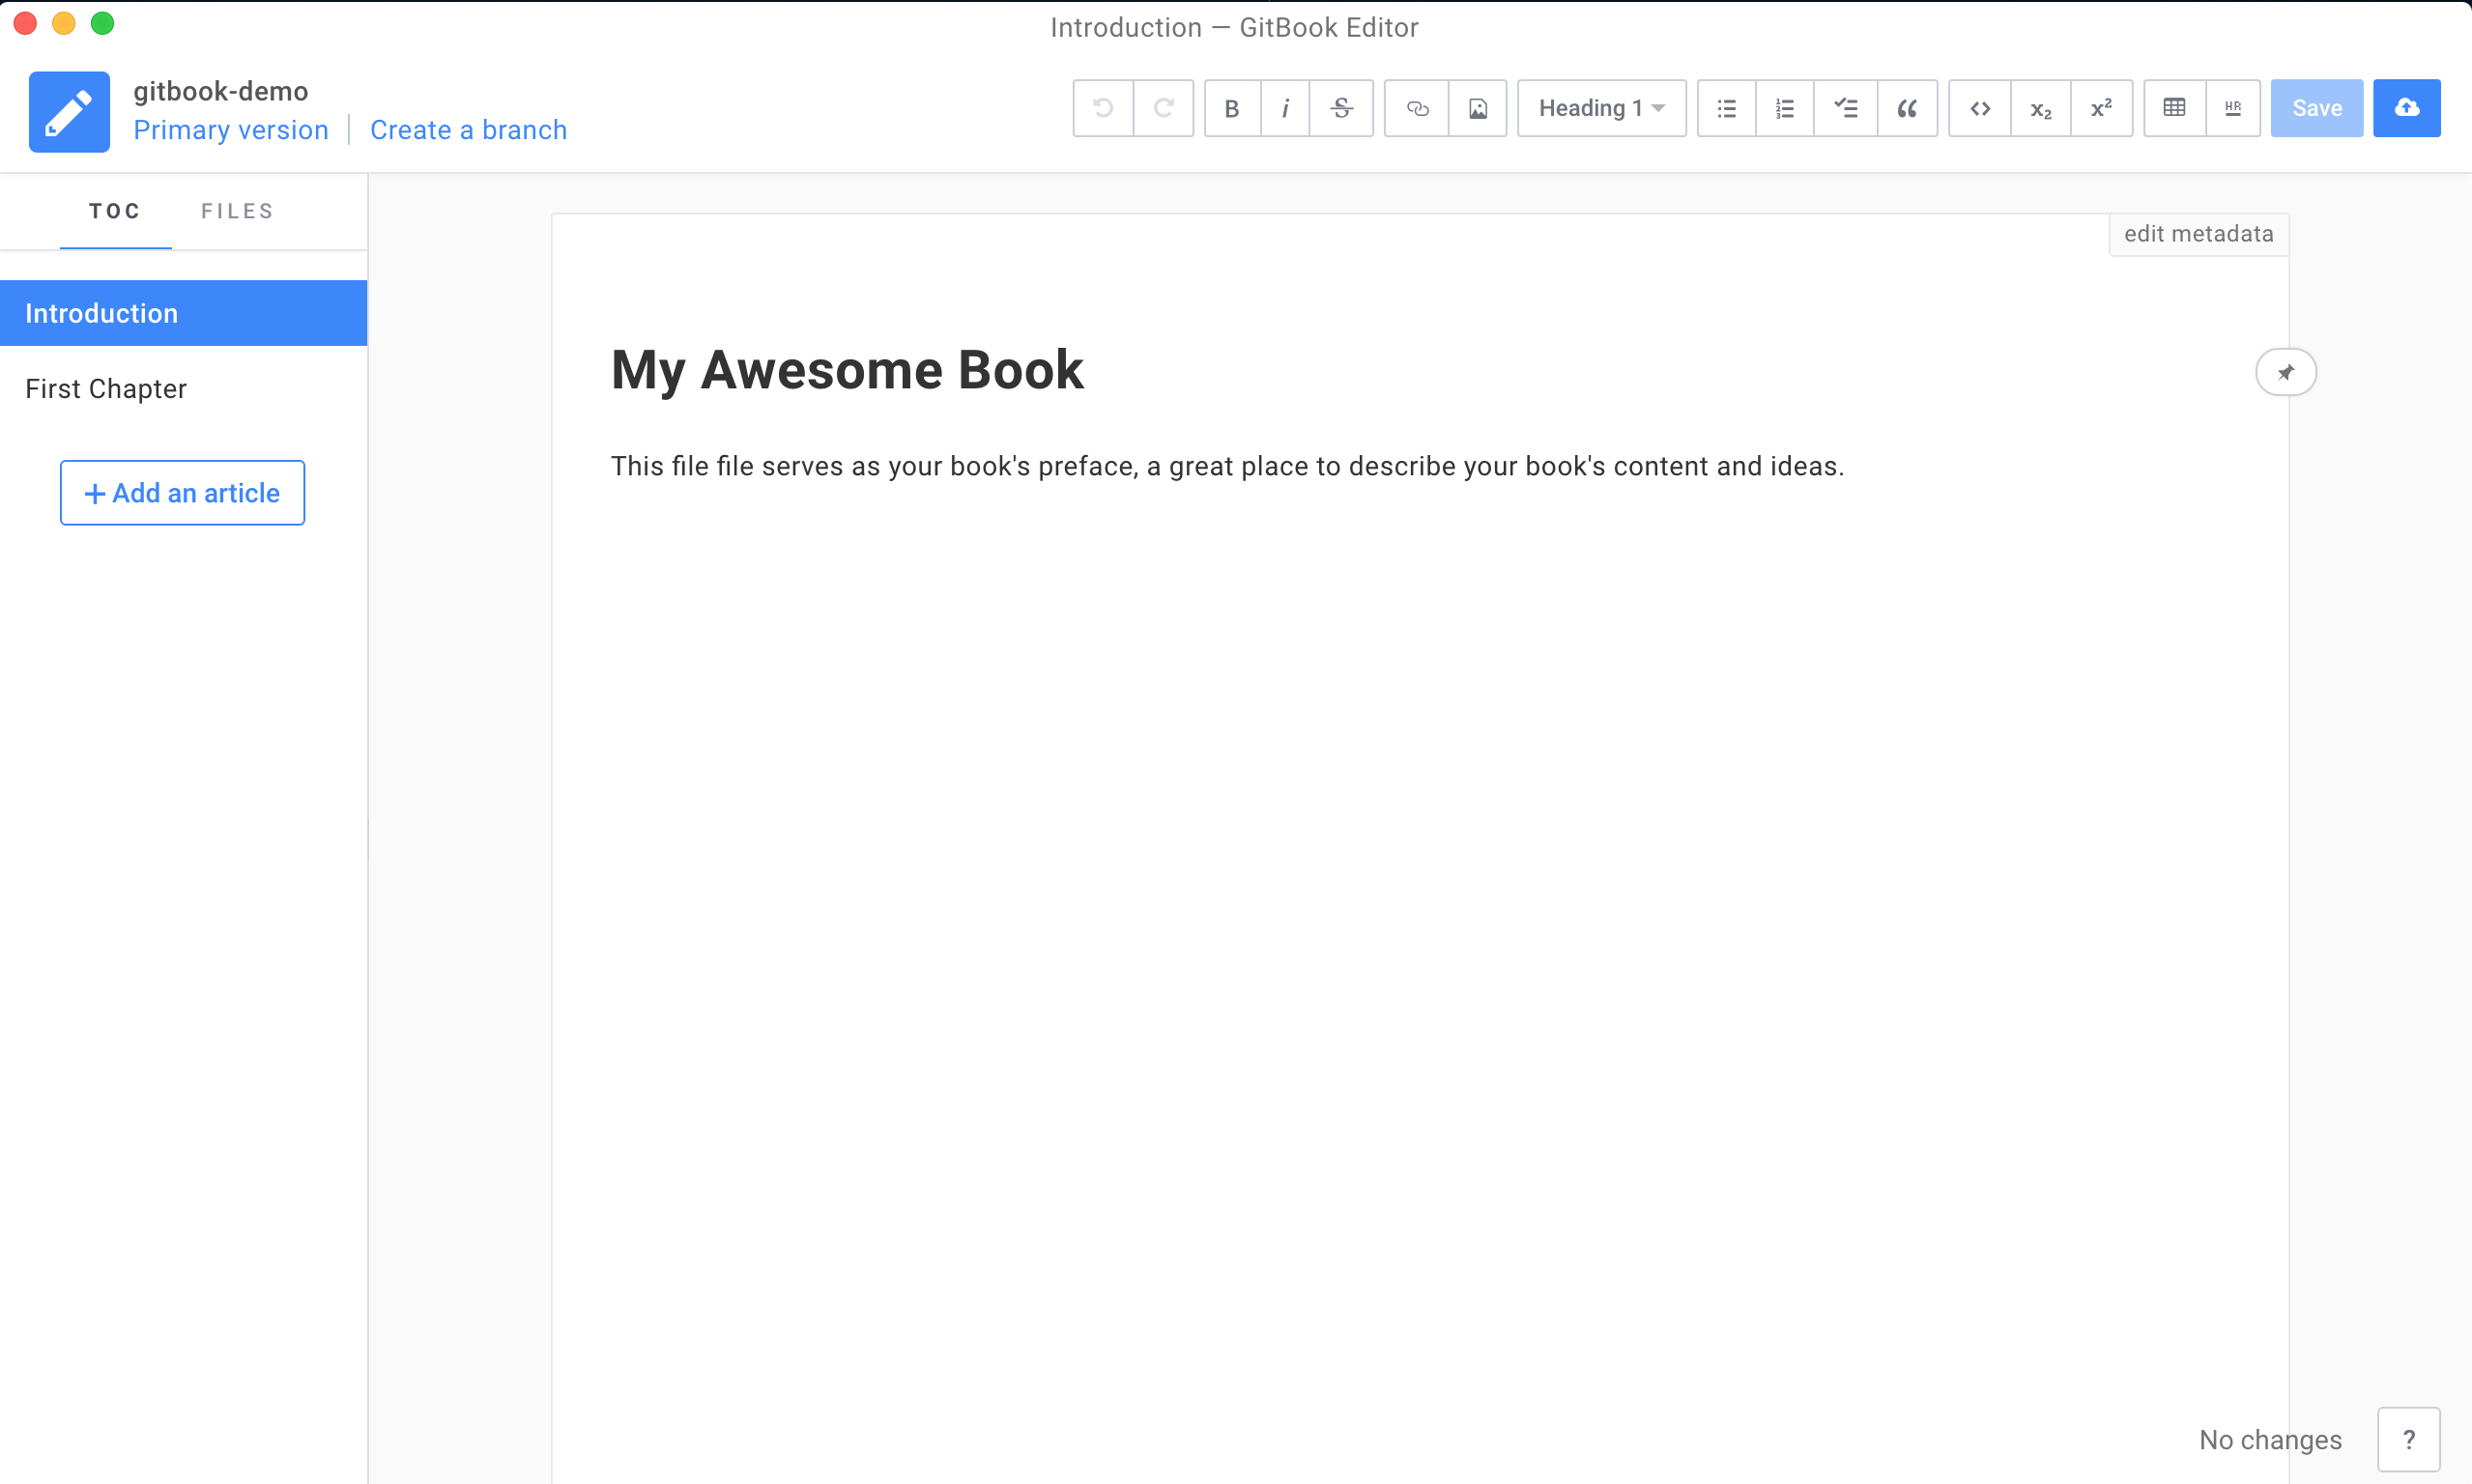 gitbook-editor-demo-preview.png